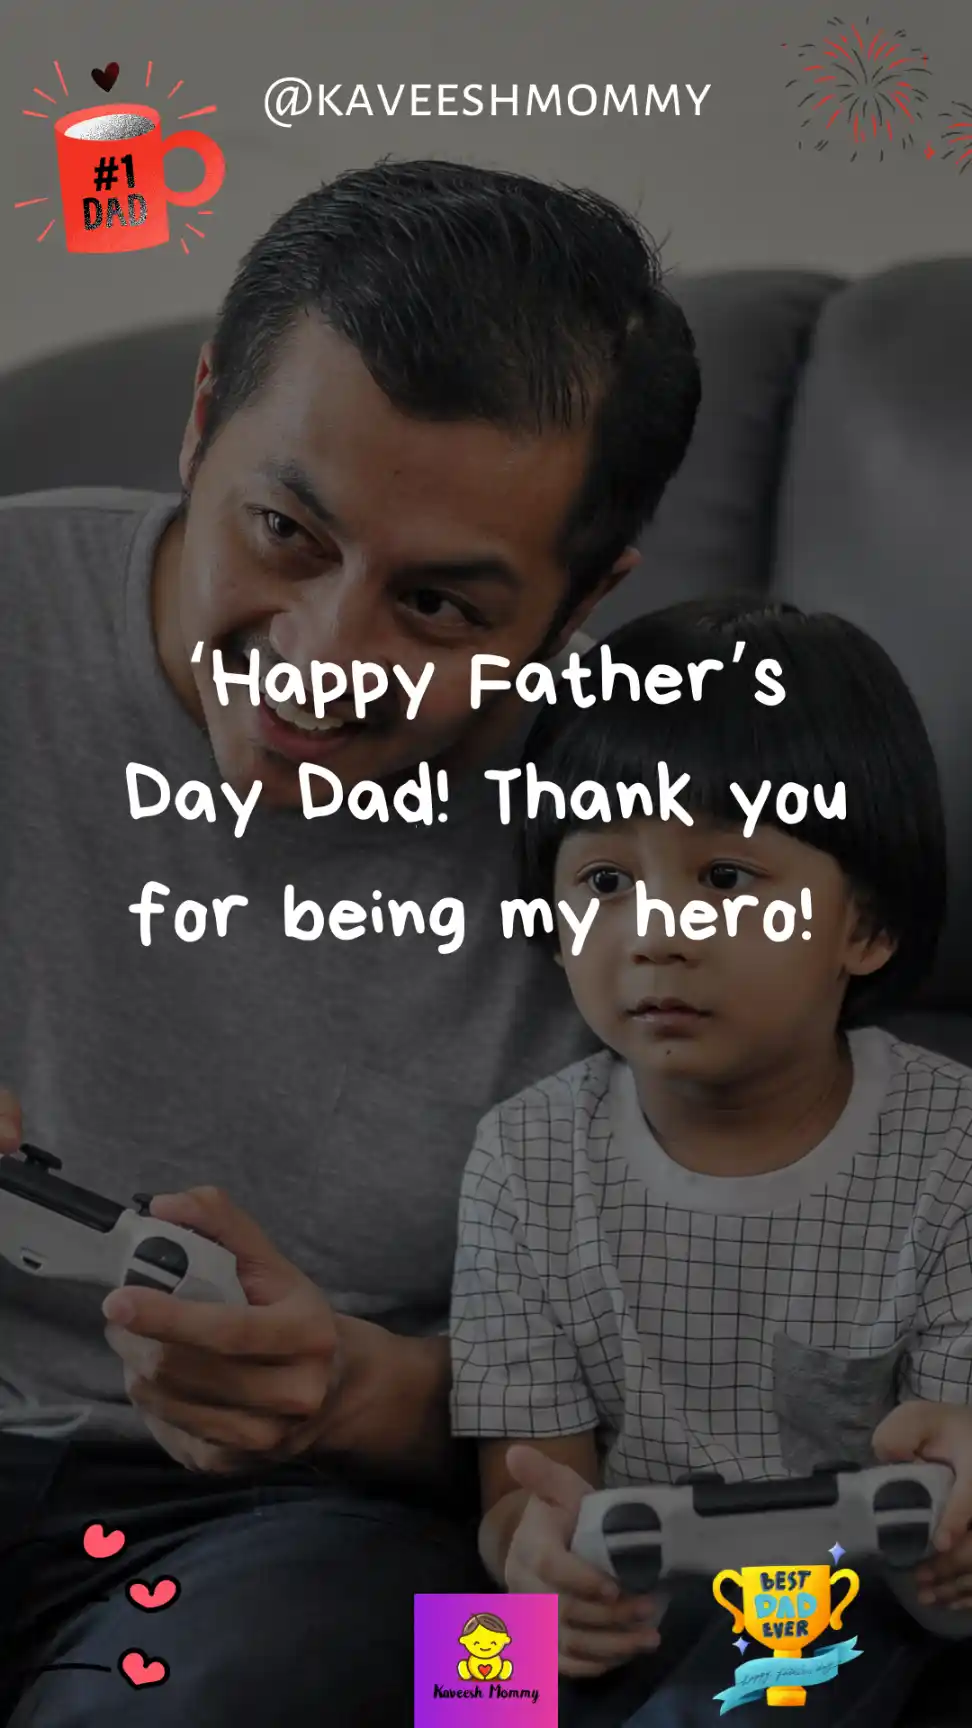 father's day card messages for son‘-Happy Father’s Day Dad! Thank you for being my hero!